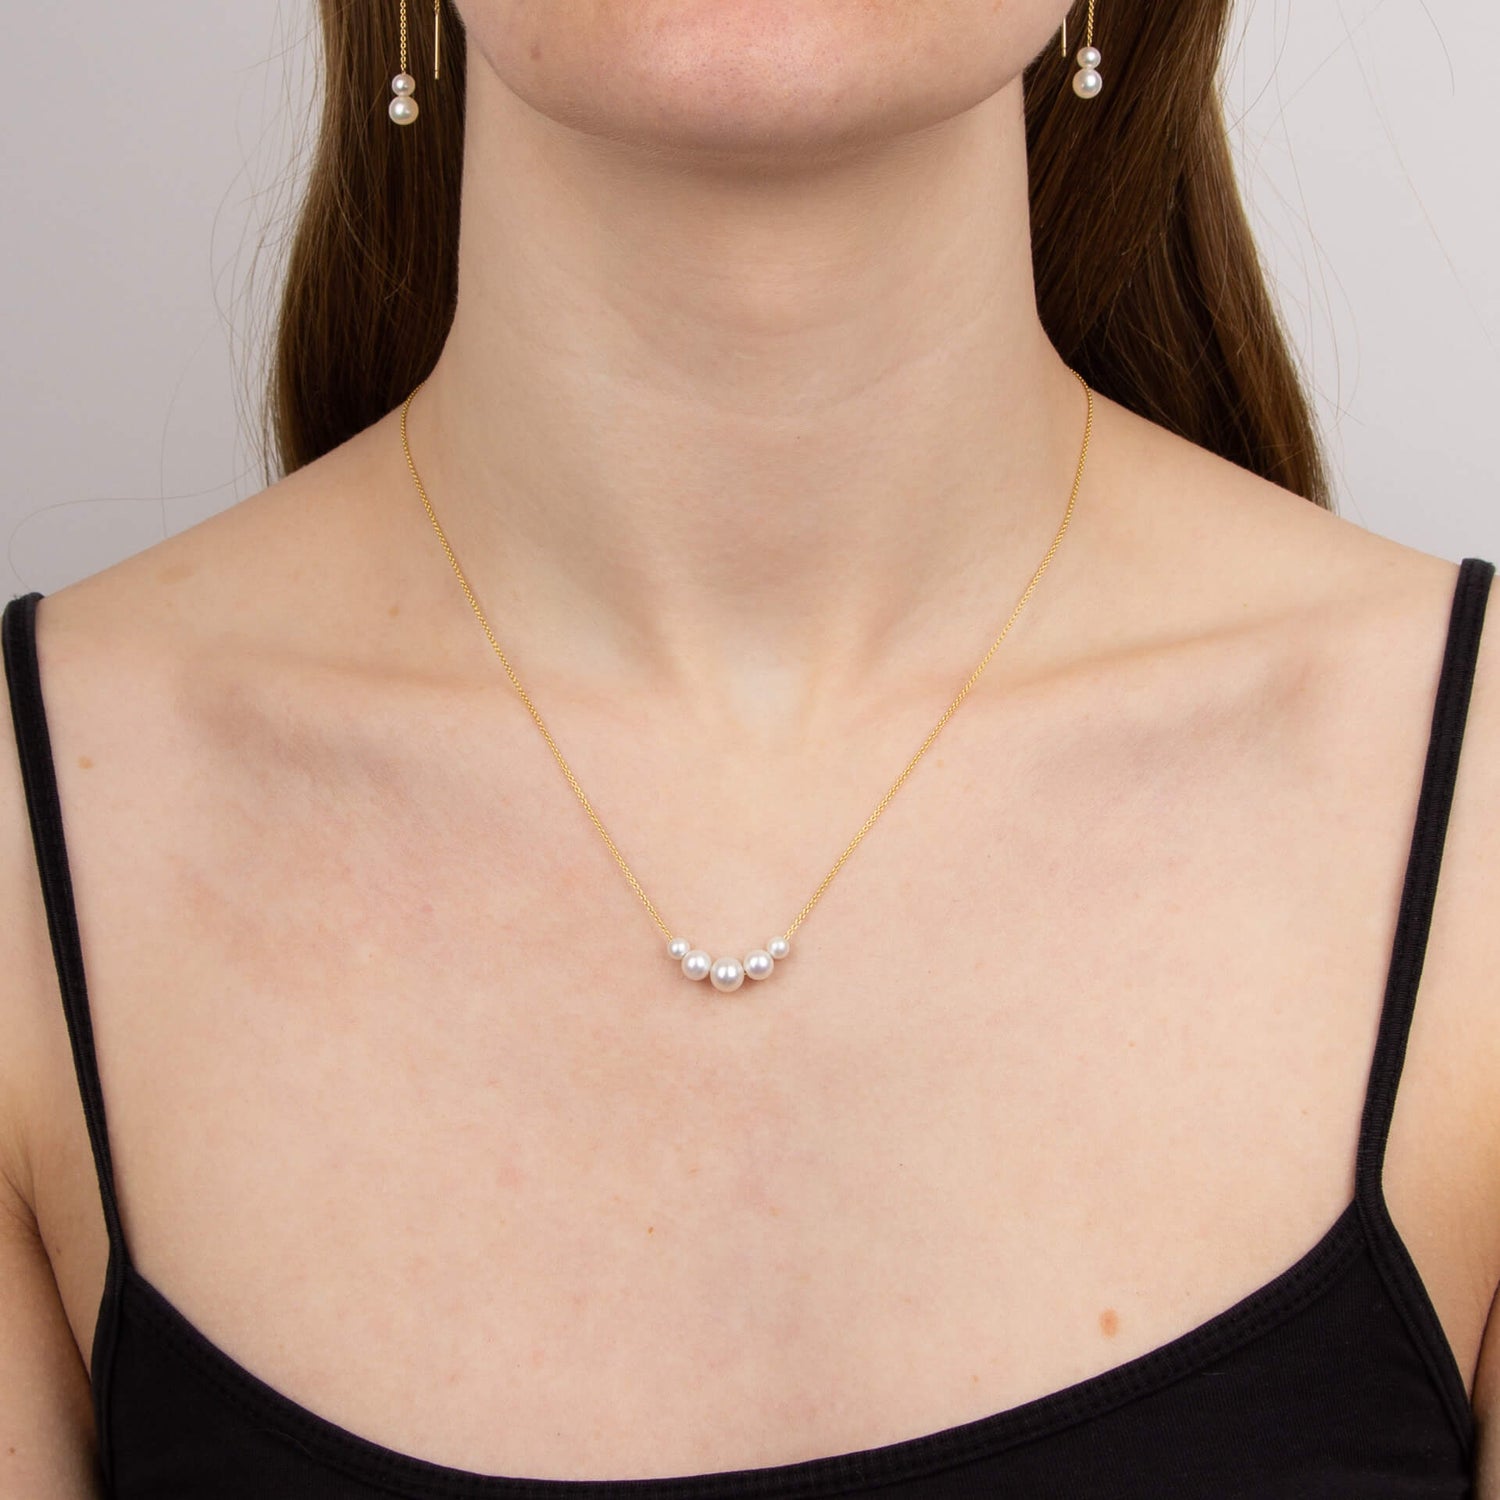 Trace Chain Necklace with Freshwater Pearl in 9ct Yellow Gold - Robert Anthony Jewellers, Edinburgh